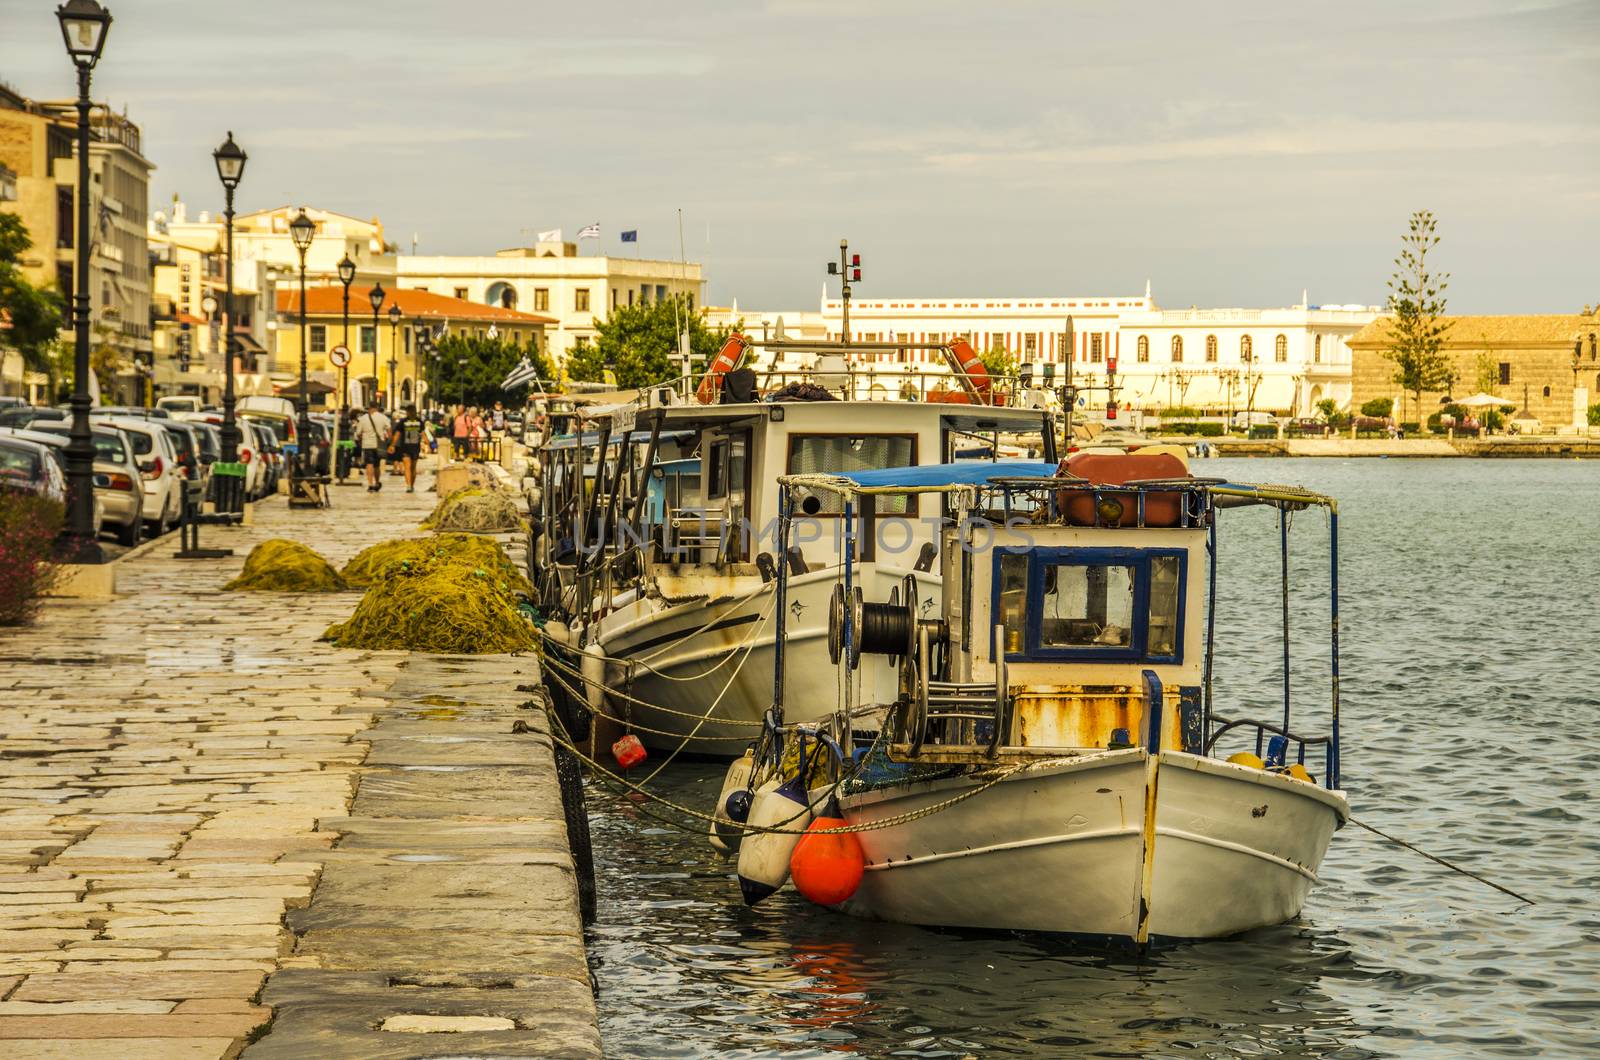 Fishing boats with their nets moored in the port of the city of Zakynthos which is also the main city of the island of Corfu. In the background you can see the old catholic church of the city.